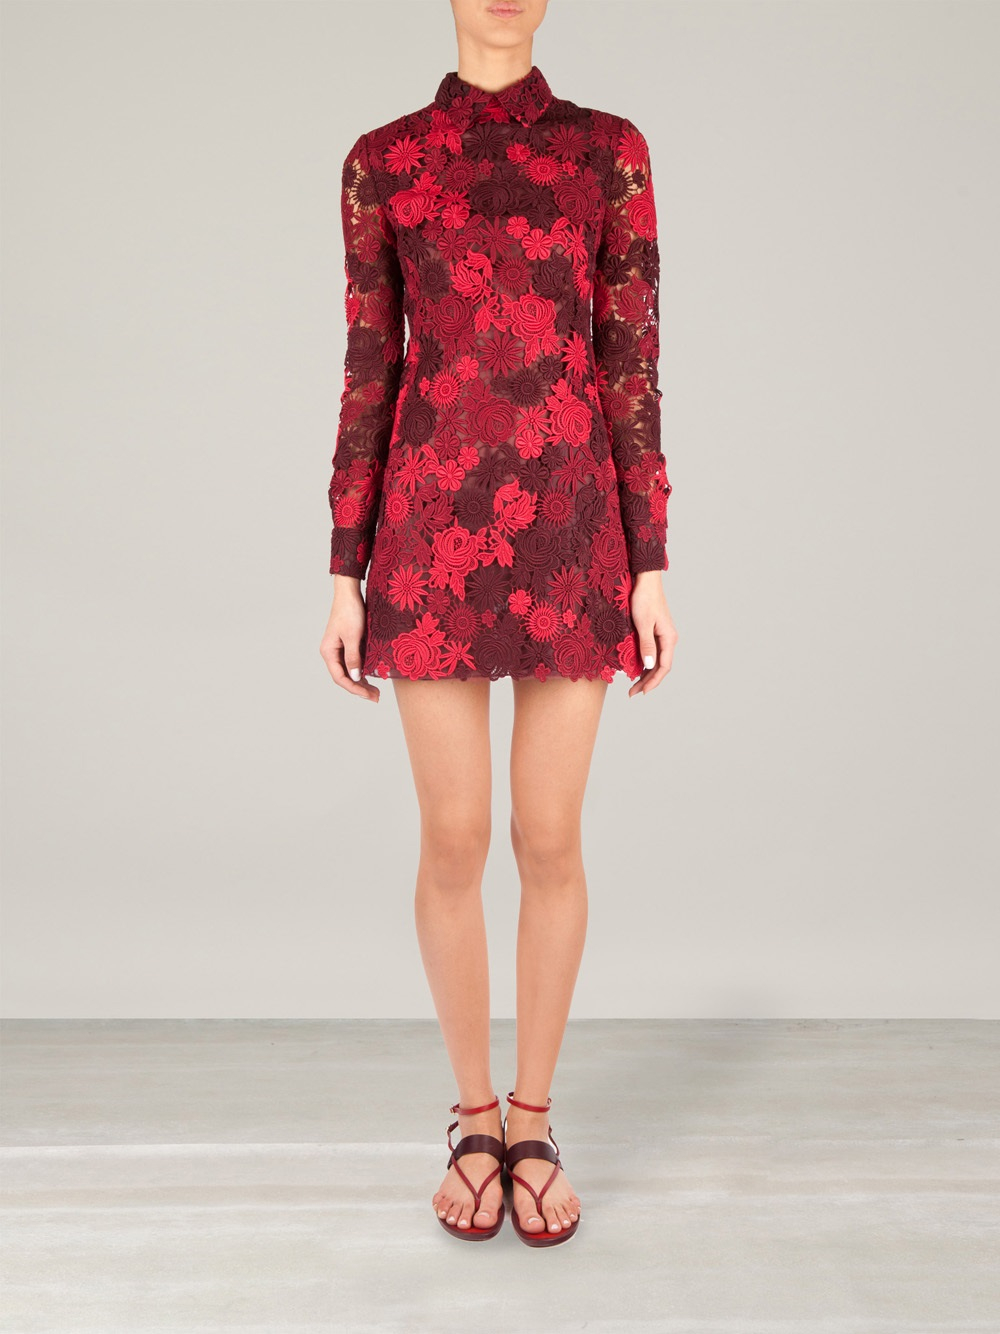 Lyst - Valentino Floral Macrame Dress in Red